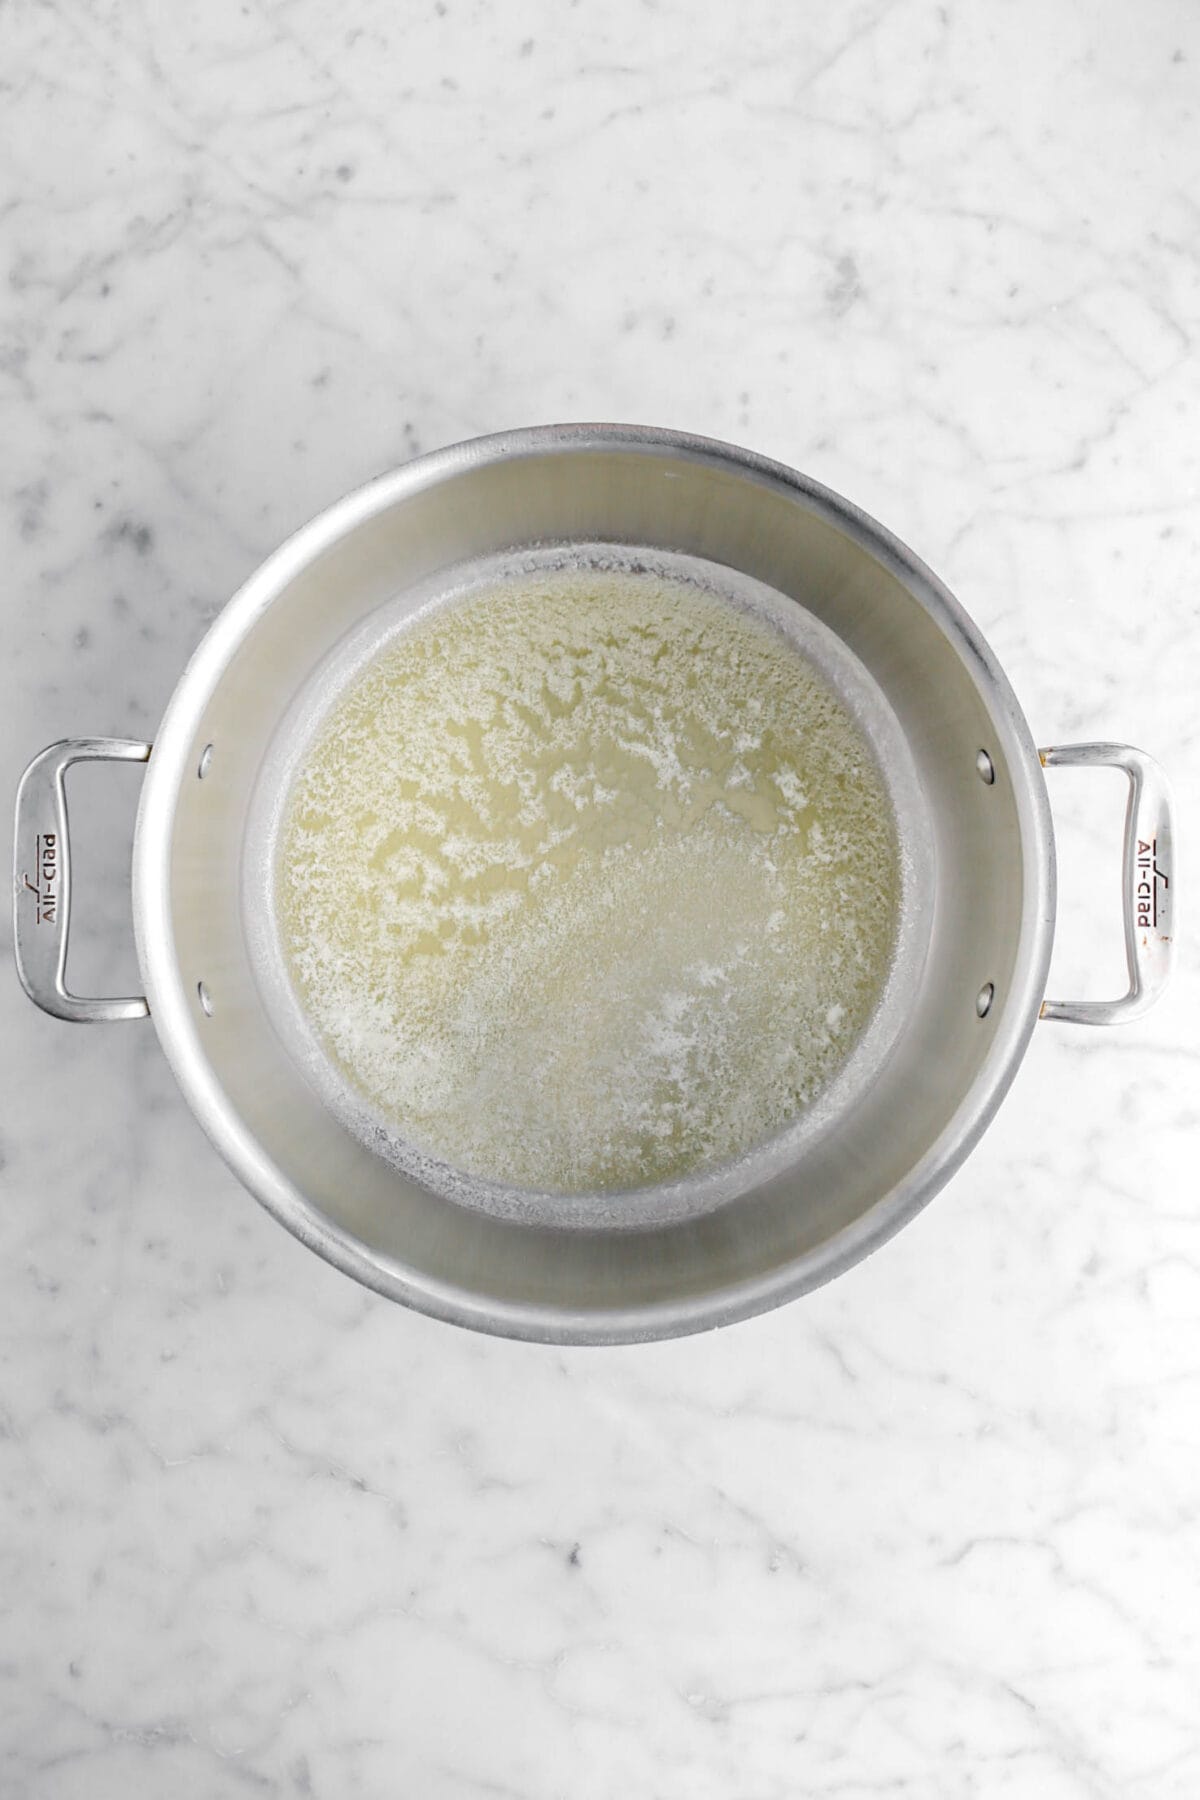 melted butter in stand mixer.